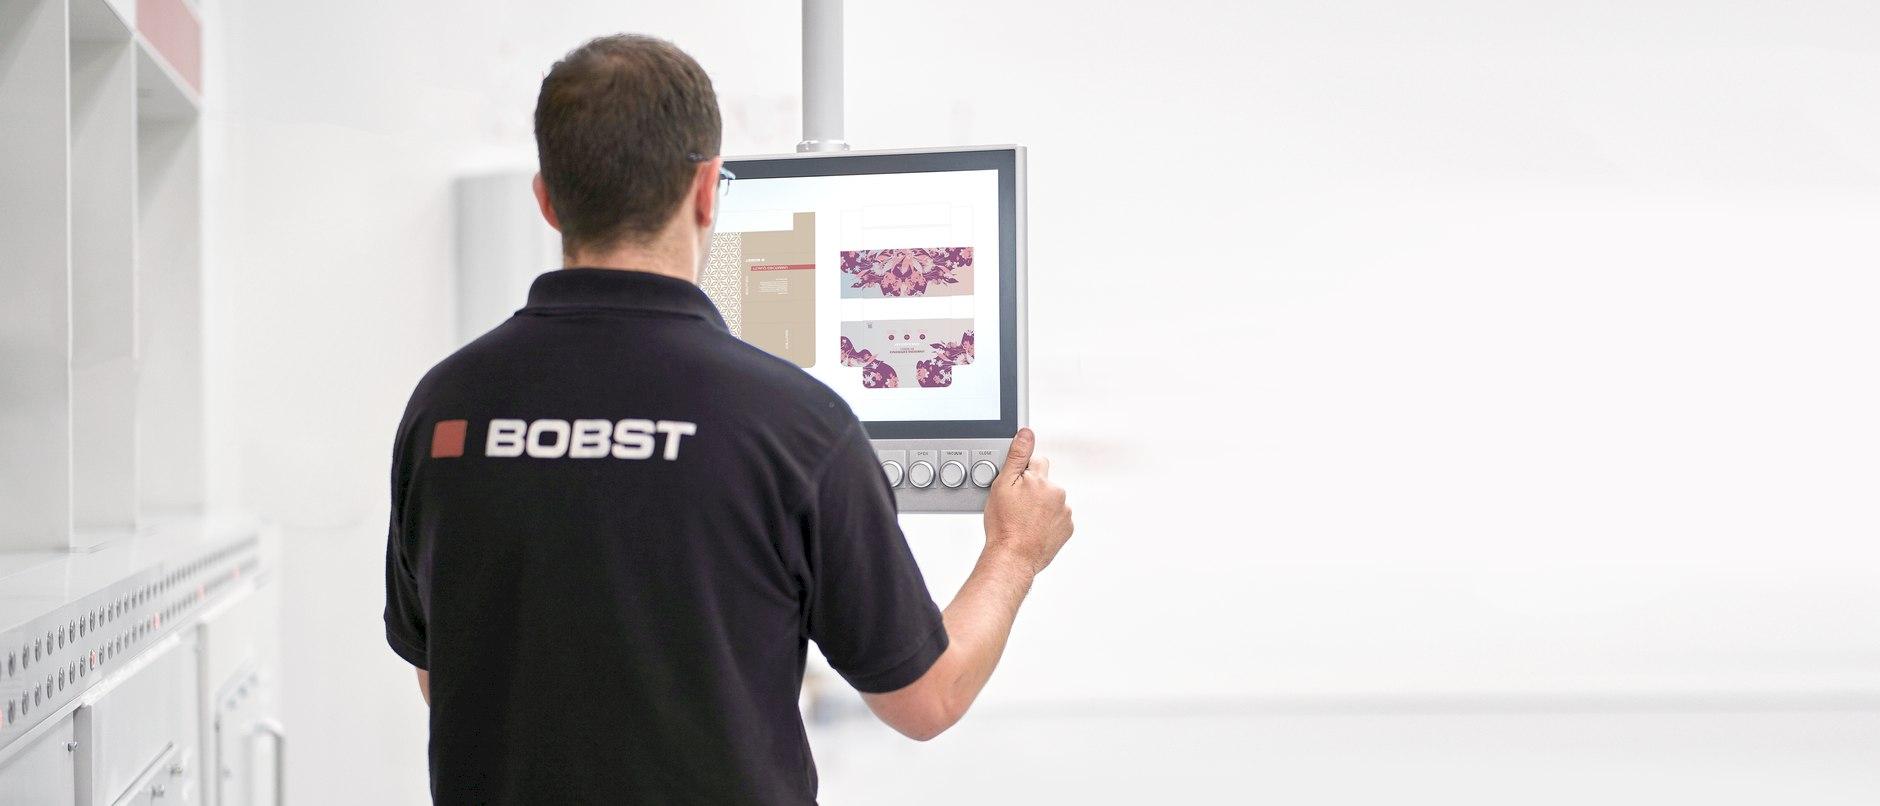 A man wearing a BOBST shirt standing in front of an industrial control display